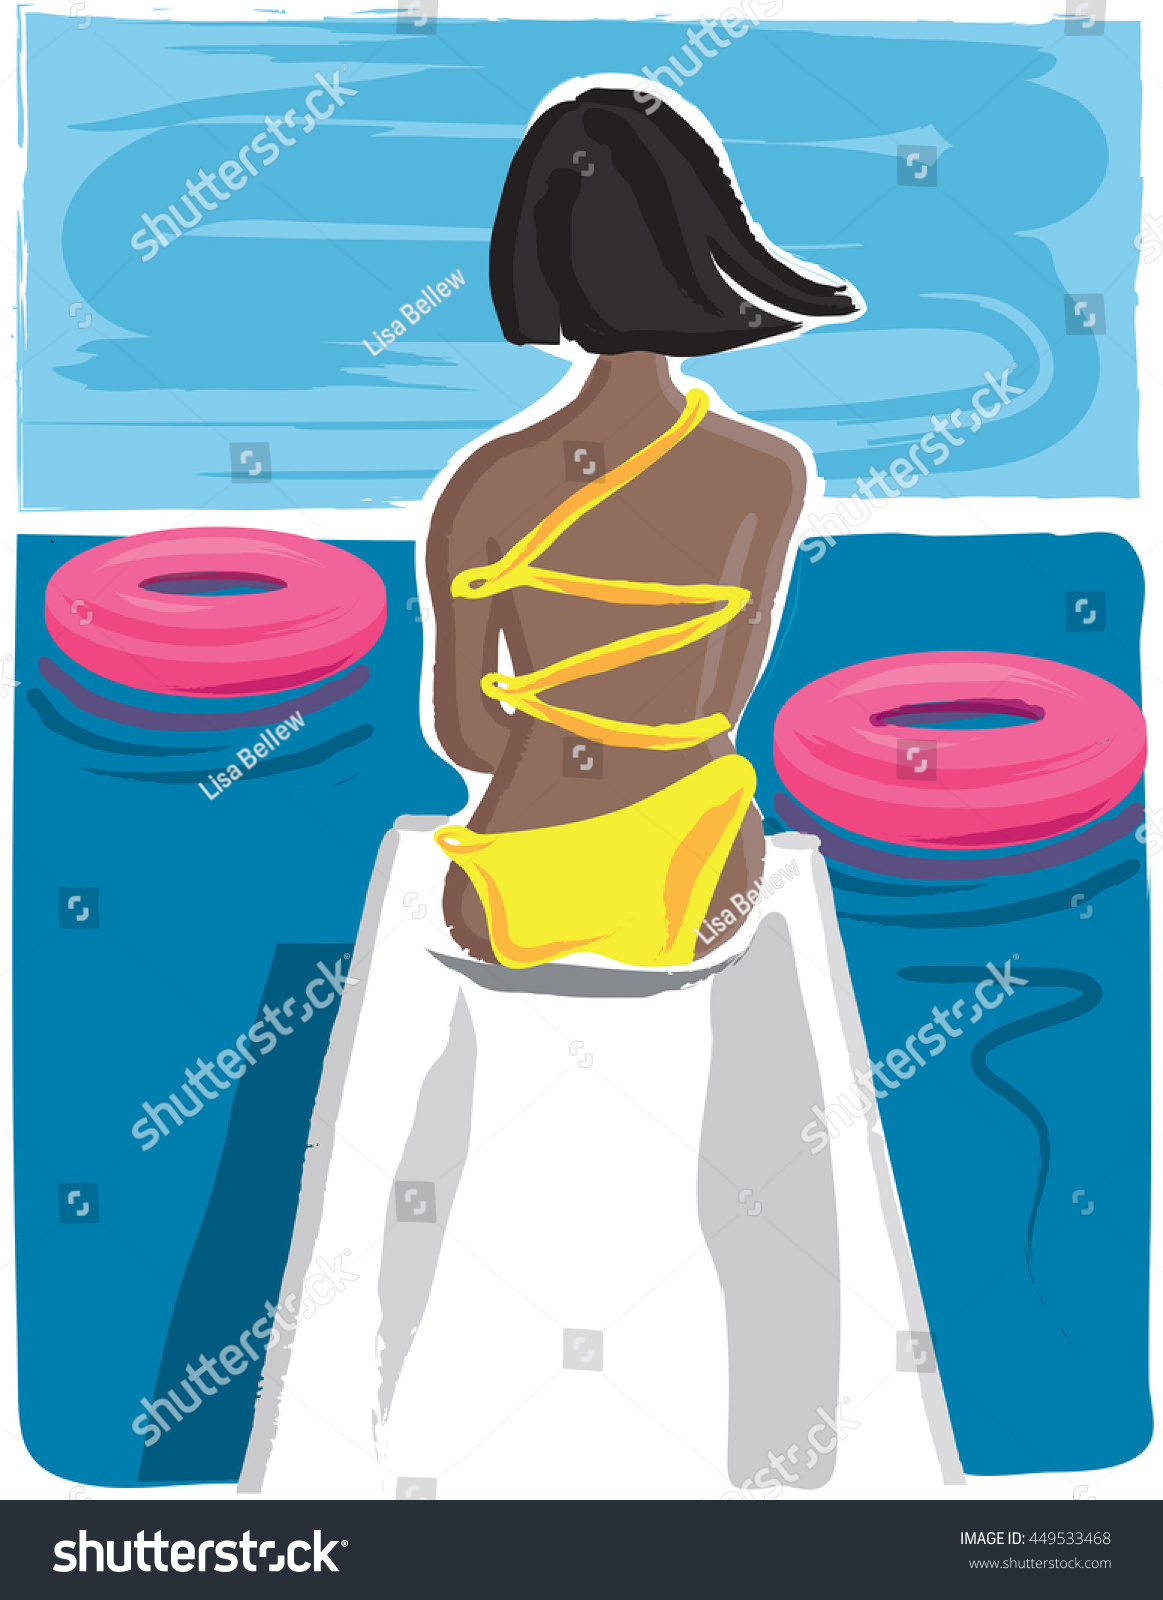 SVG of Woman sitting on diving board. svg